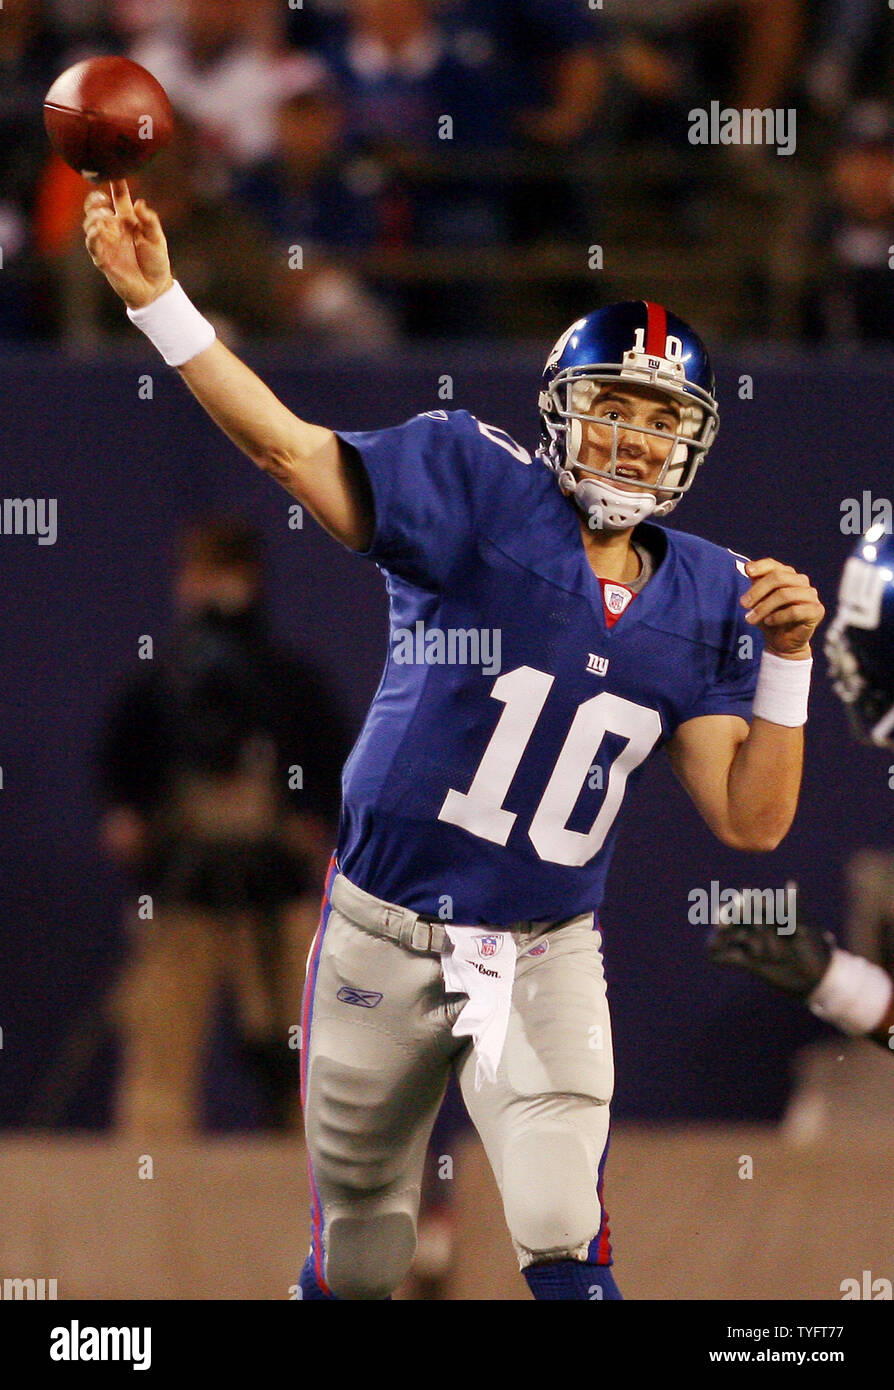 New York Giants Eli Manning throws a pass during week 1 at Giants Stadium  in East Rutherford, New Jersey on September 10, 2006. Peyton Manning and Eli  Manning played each other for